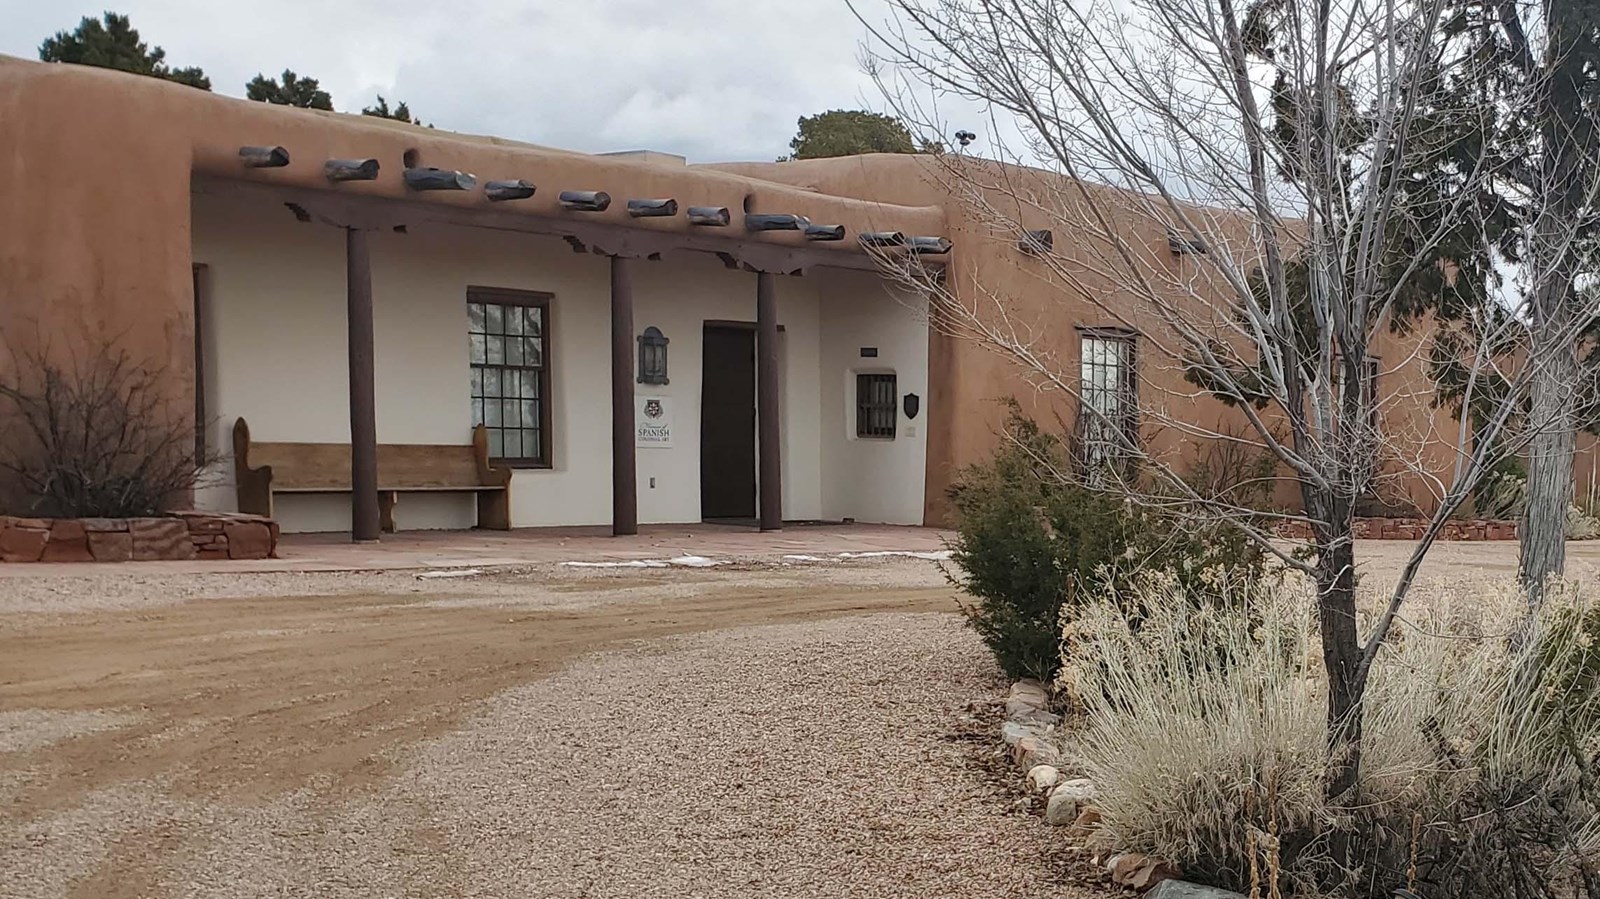 Brown and white pueblo style building along gravel drive